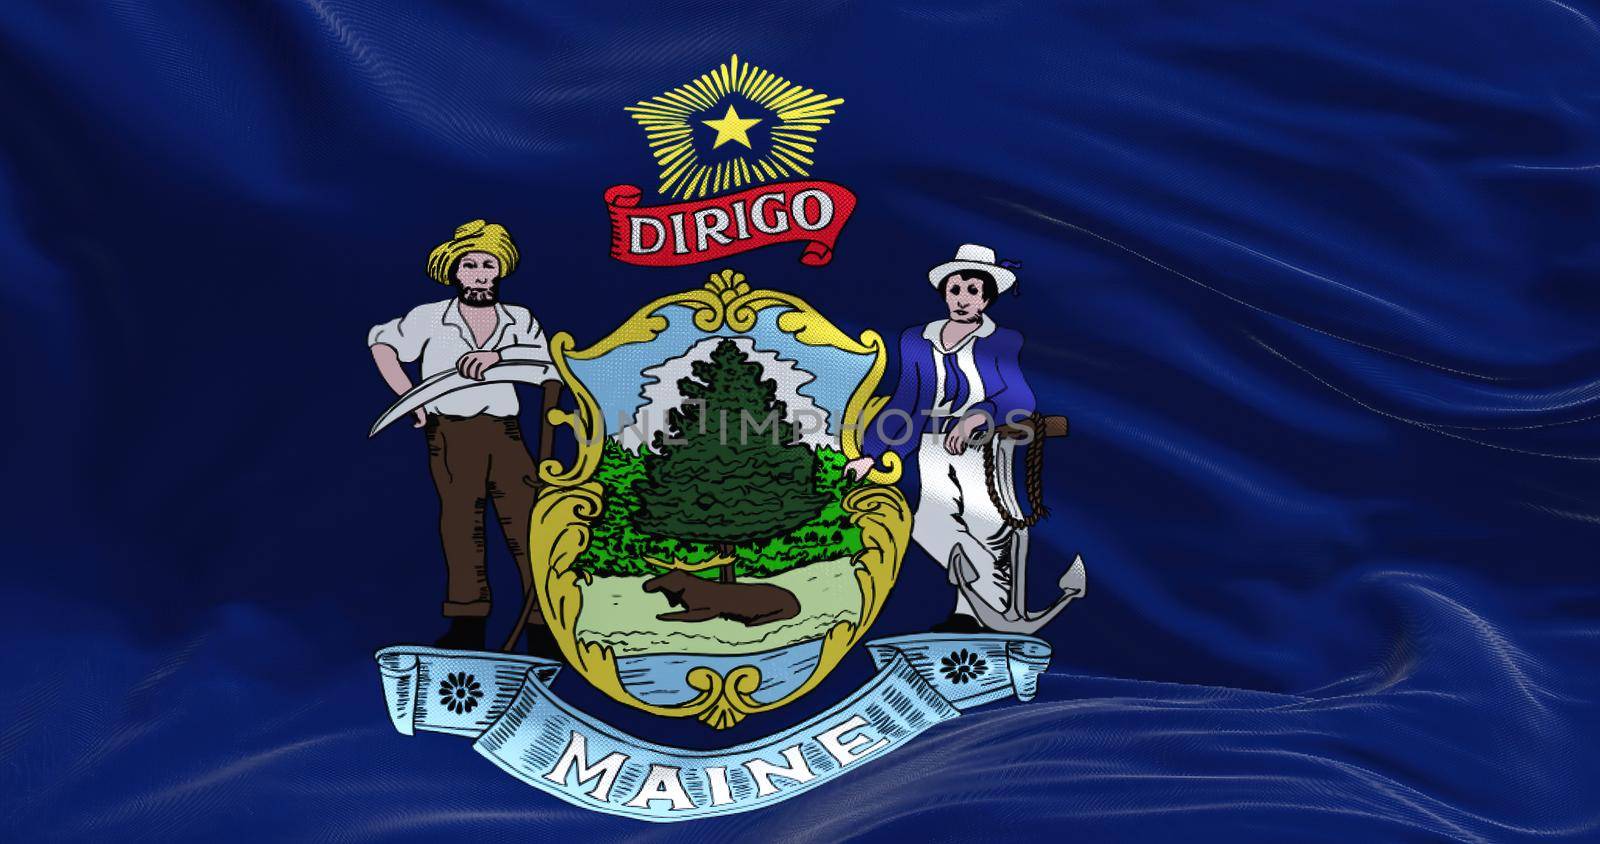 The US state flag of Maine waving in the wind. Maine is a state in the New England region of the United States. Democracy and independence.